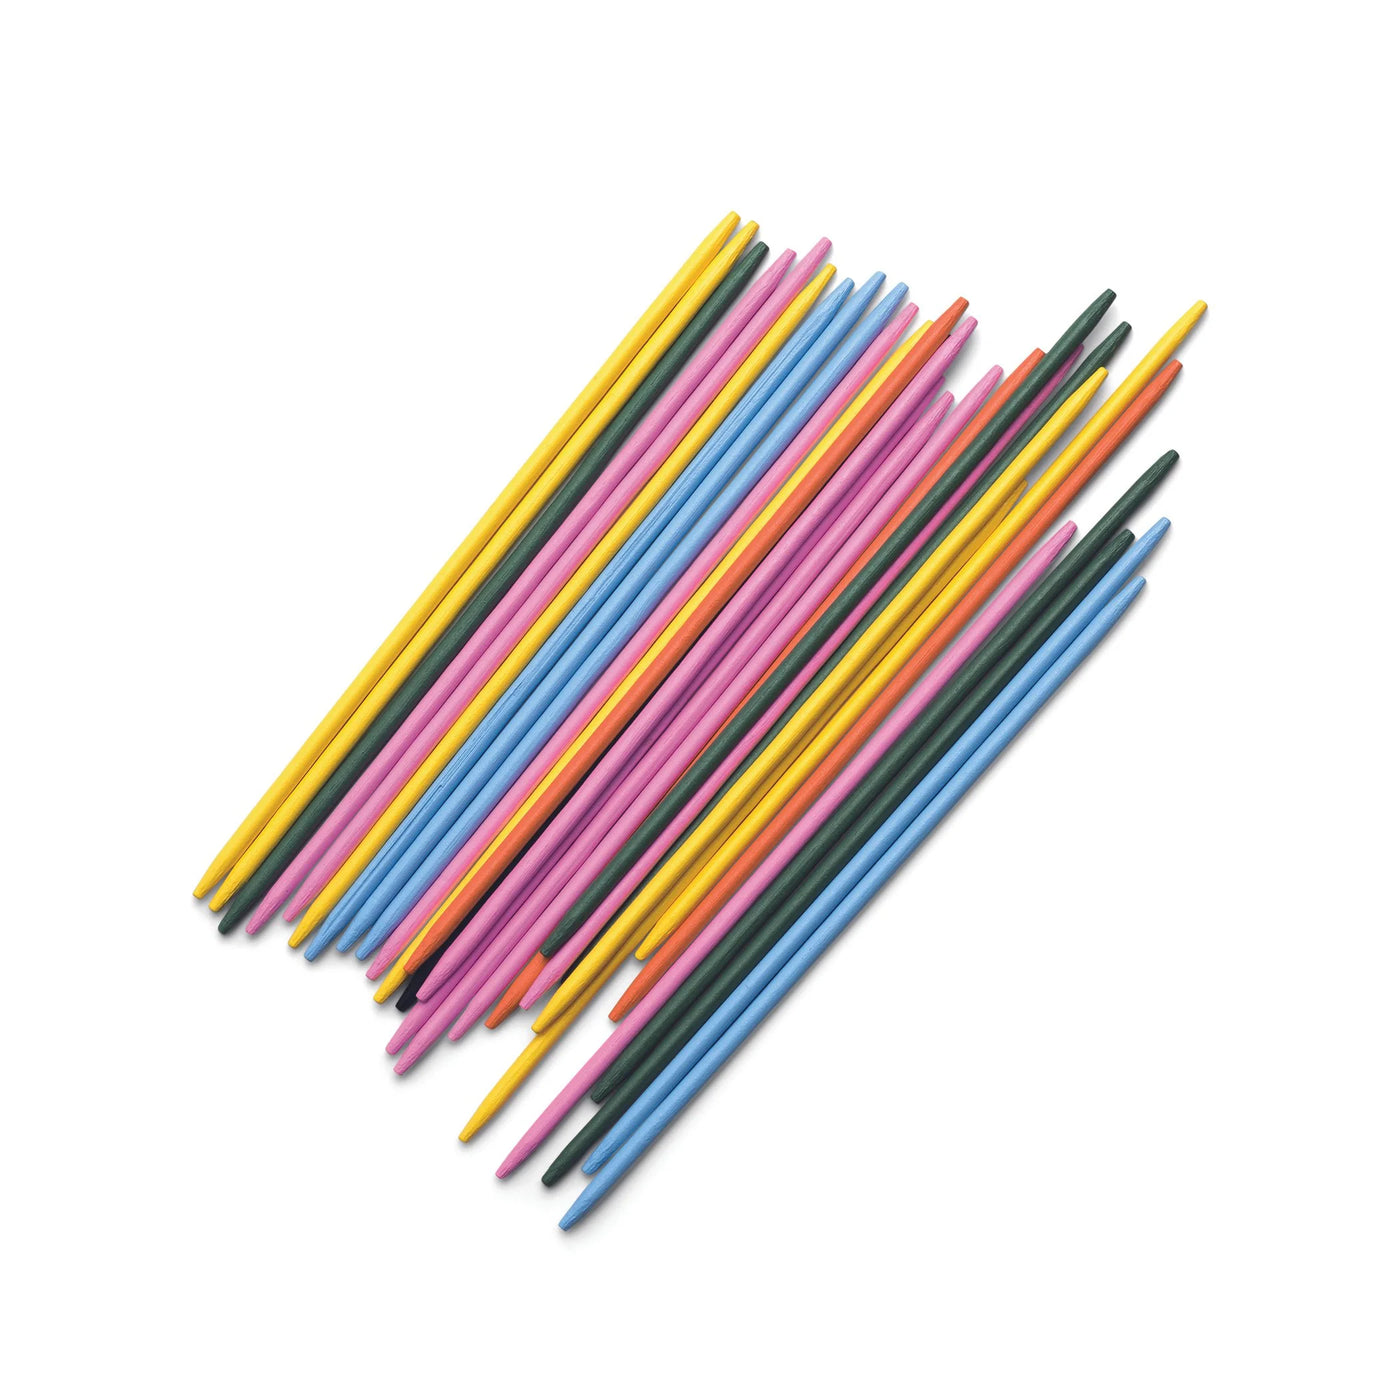 Table Top Games - Pick Up Sticks